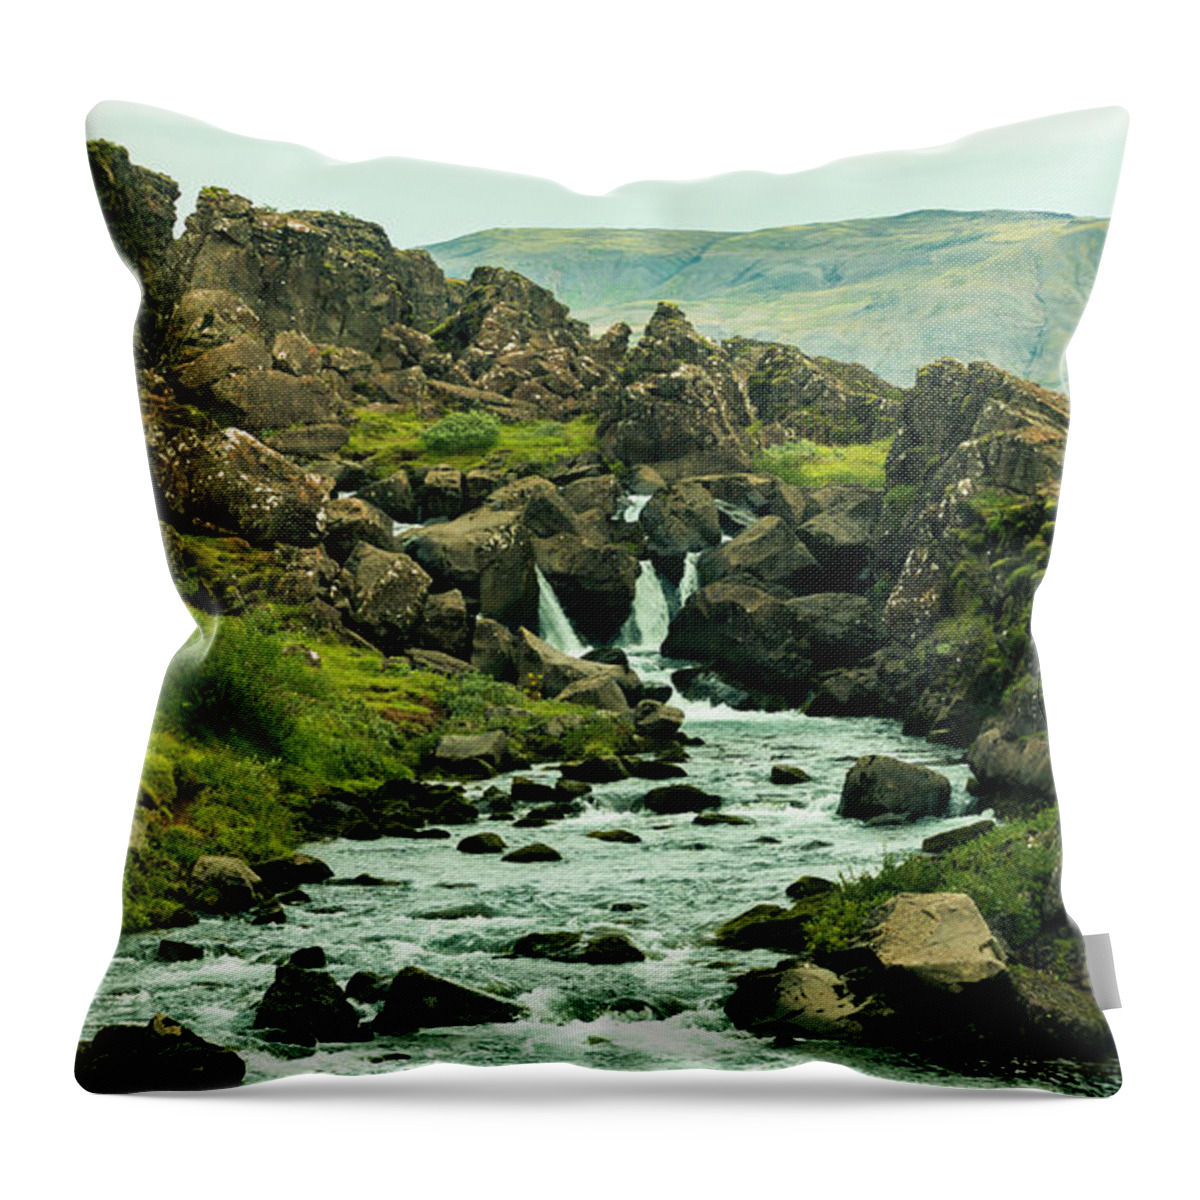 Tranquility Throw Pillow featuring the photograph Iceland by Kévin Galop